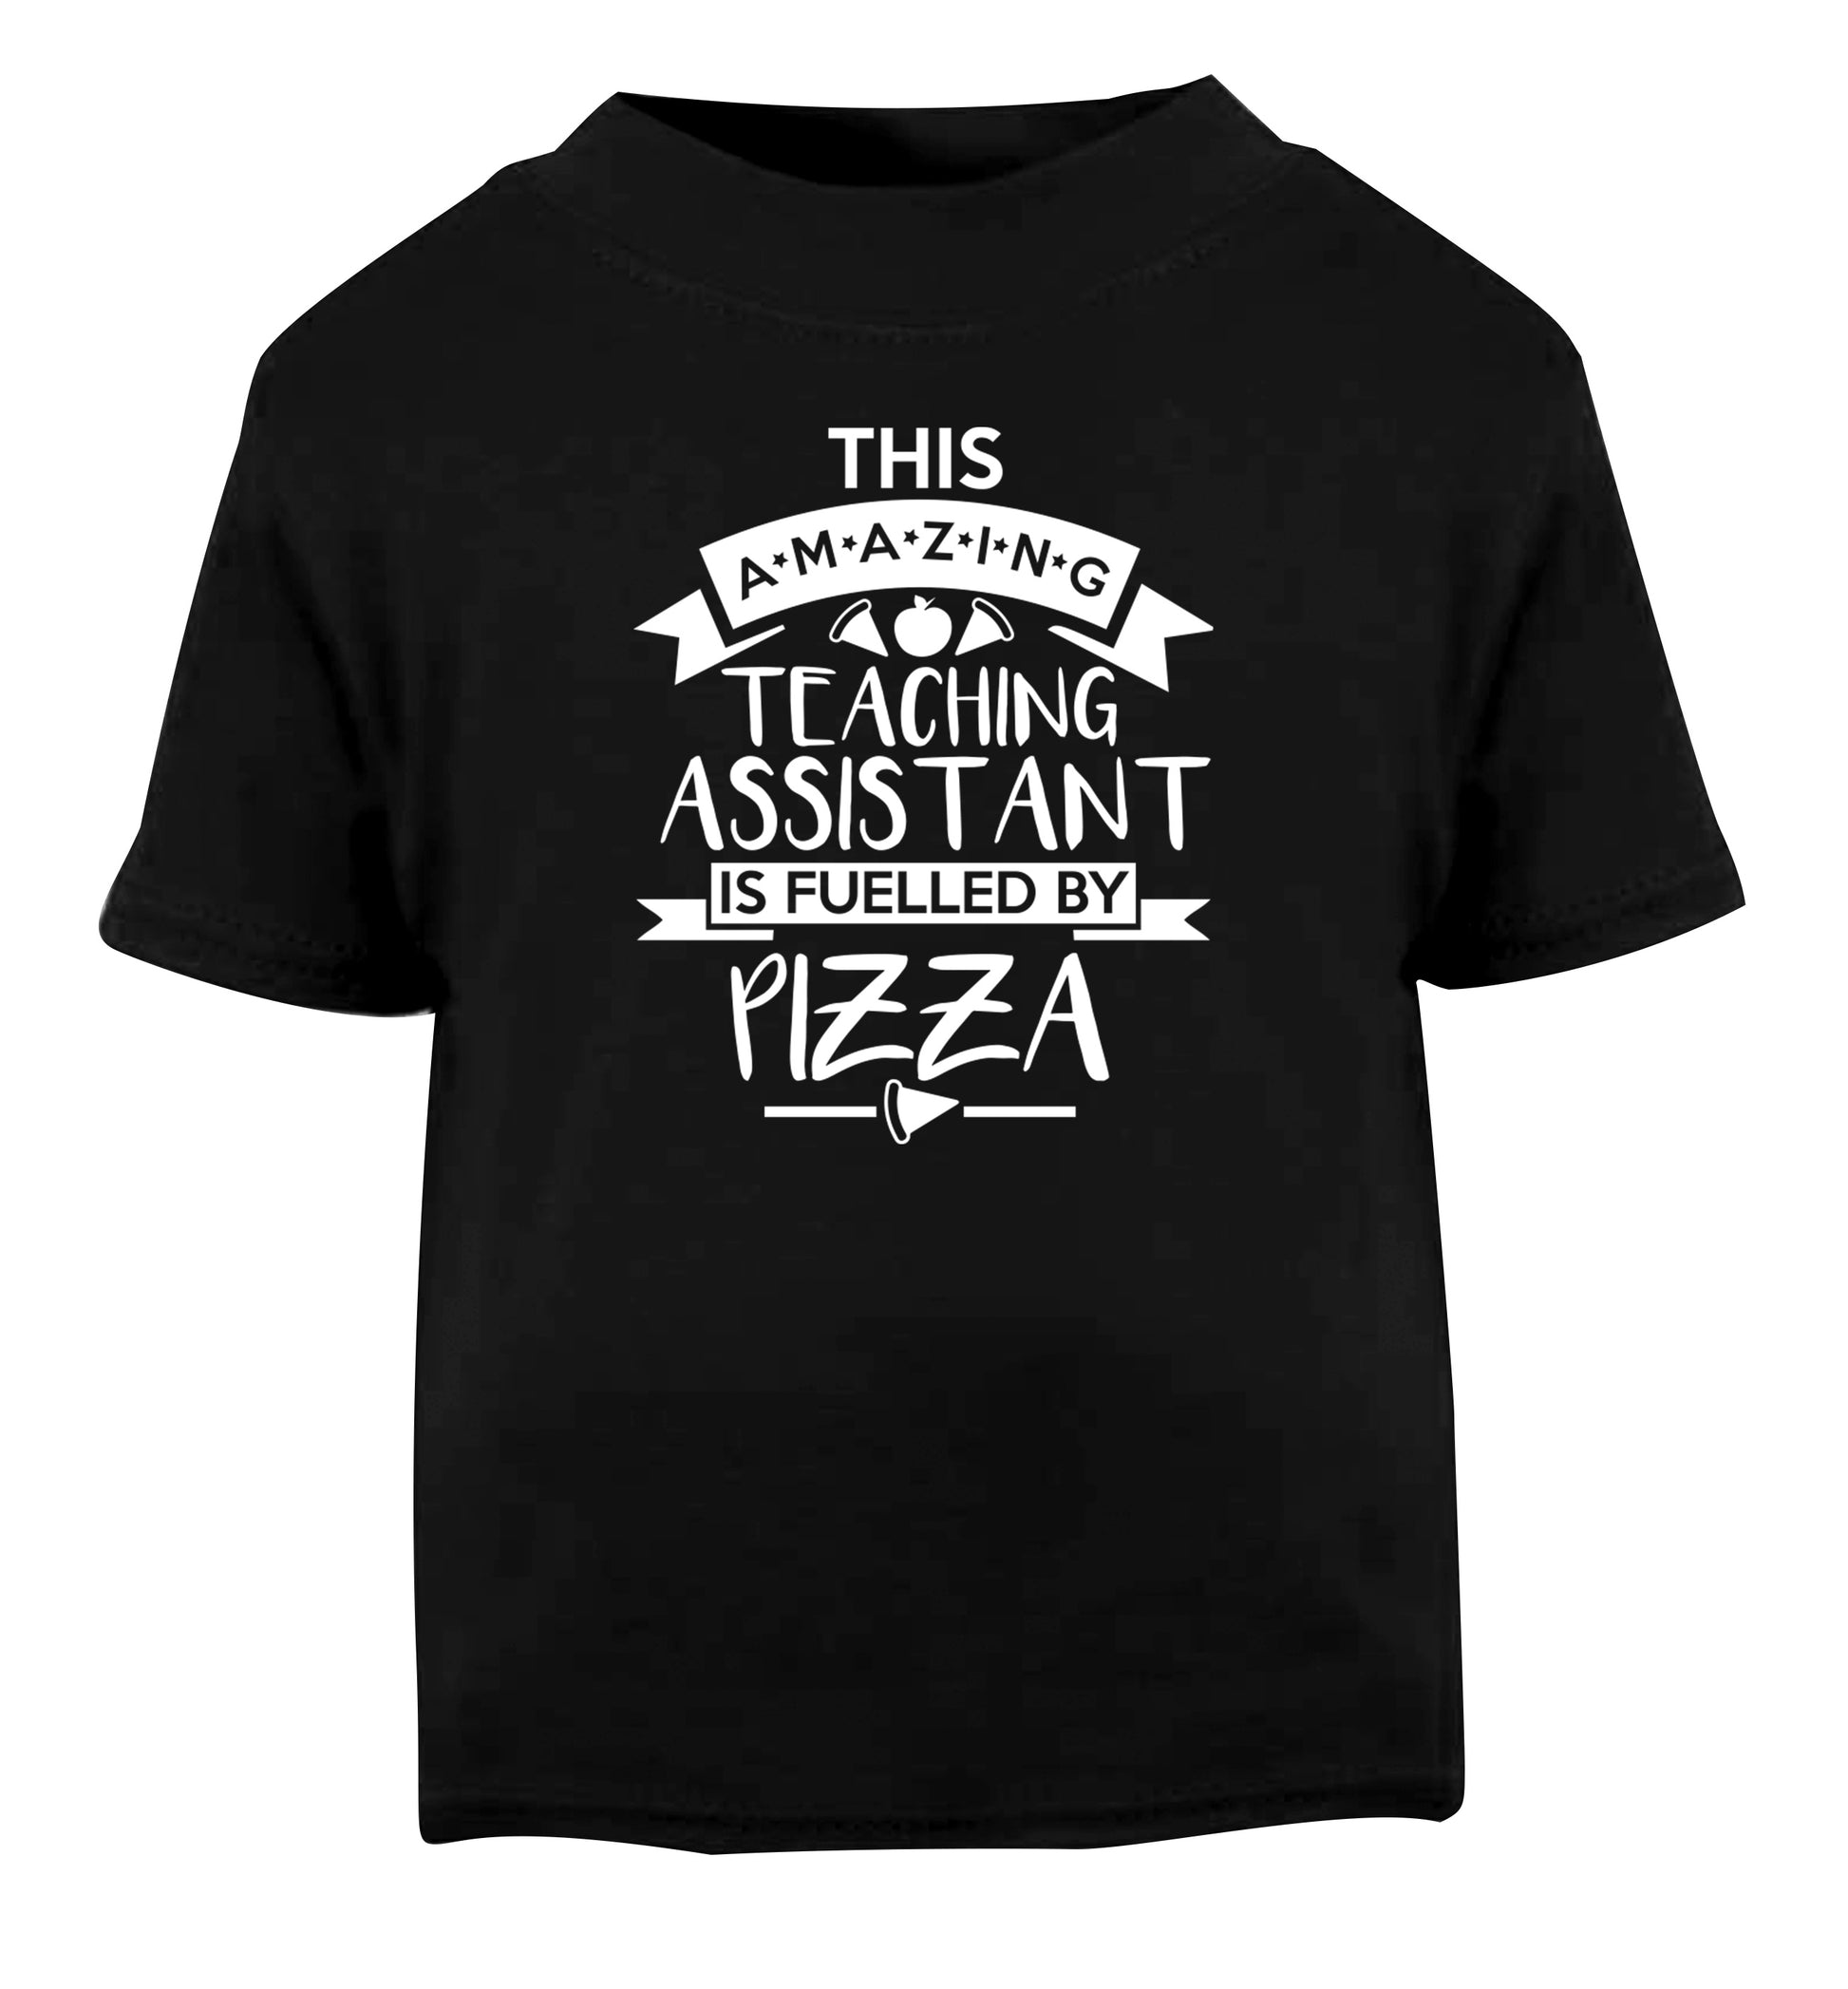 This amazing teaching assistant is fuelled by pizza Black Baby Toddler Tshirt 2 years